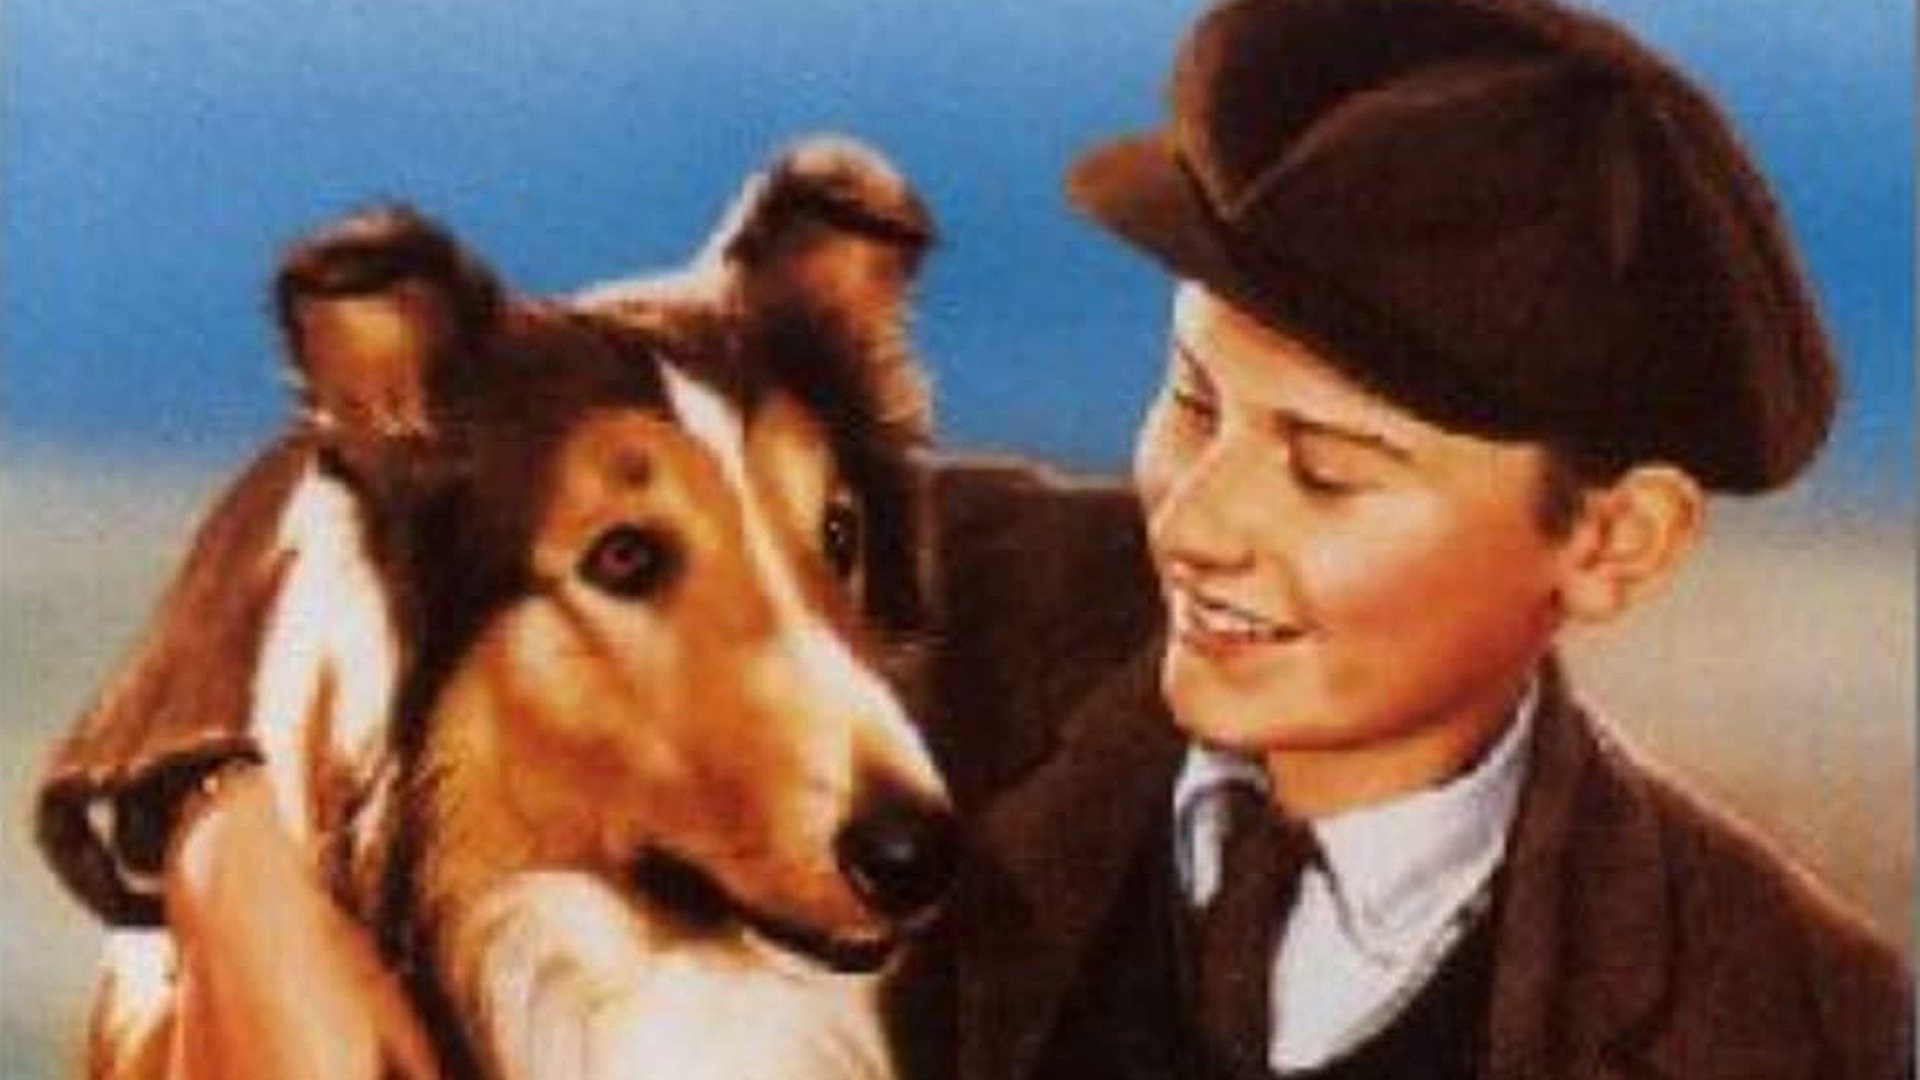 Lassie Come Home - Movie - Where To Watch